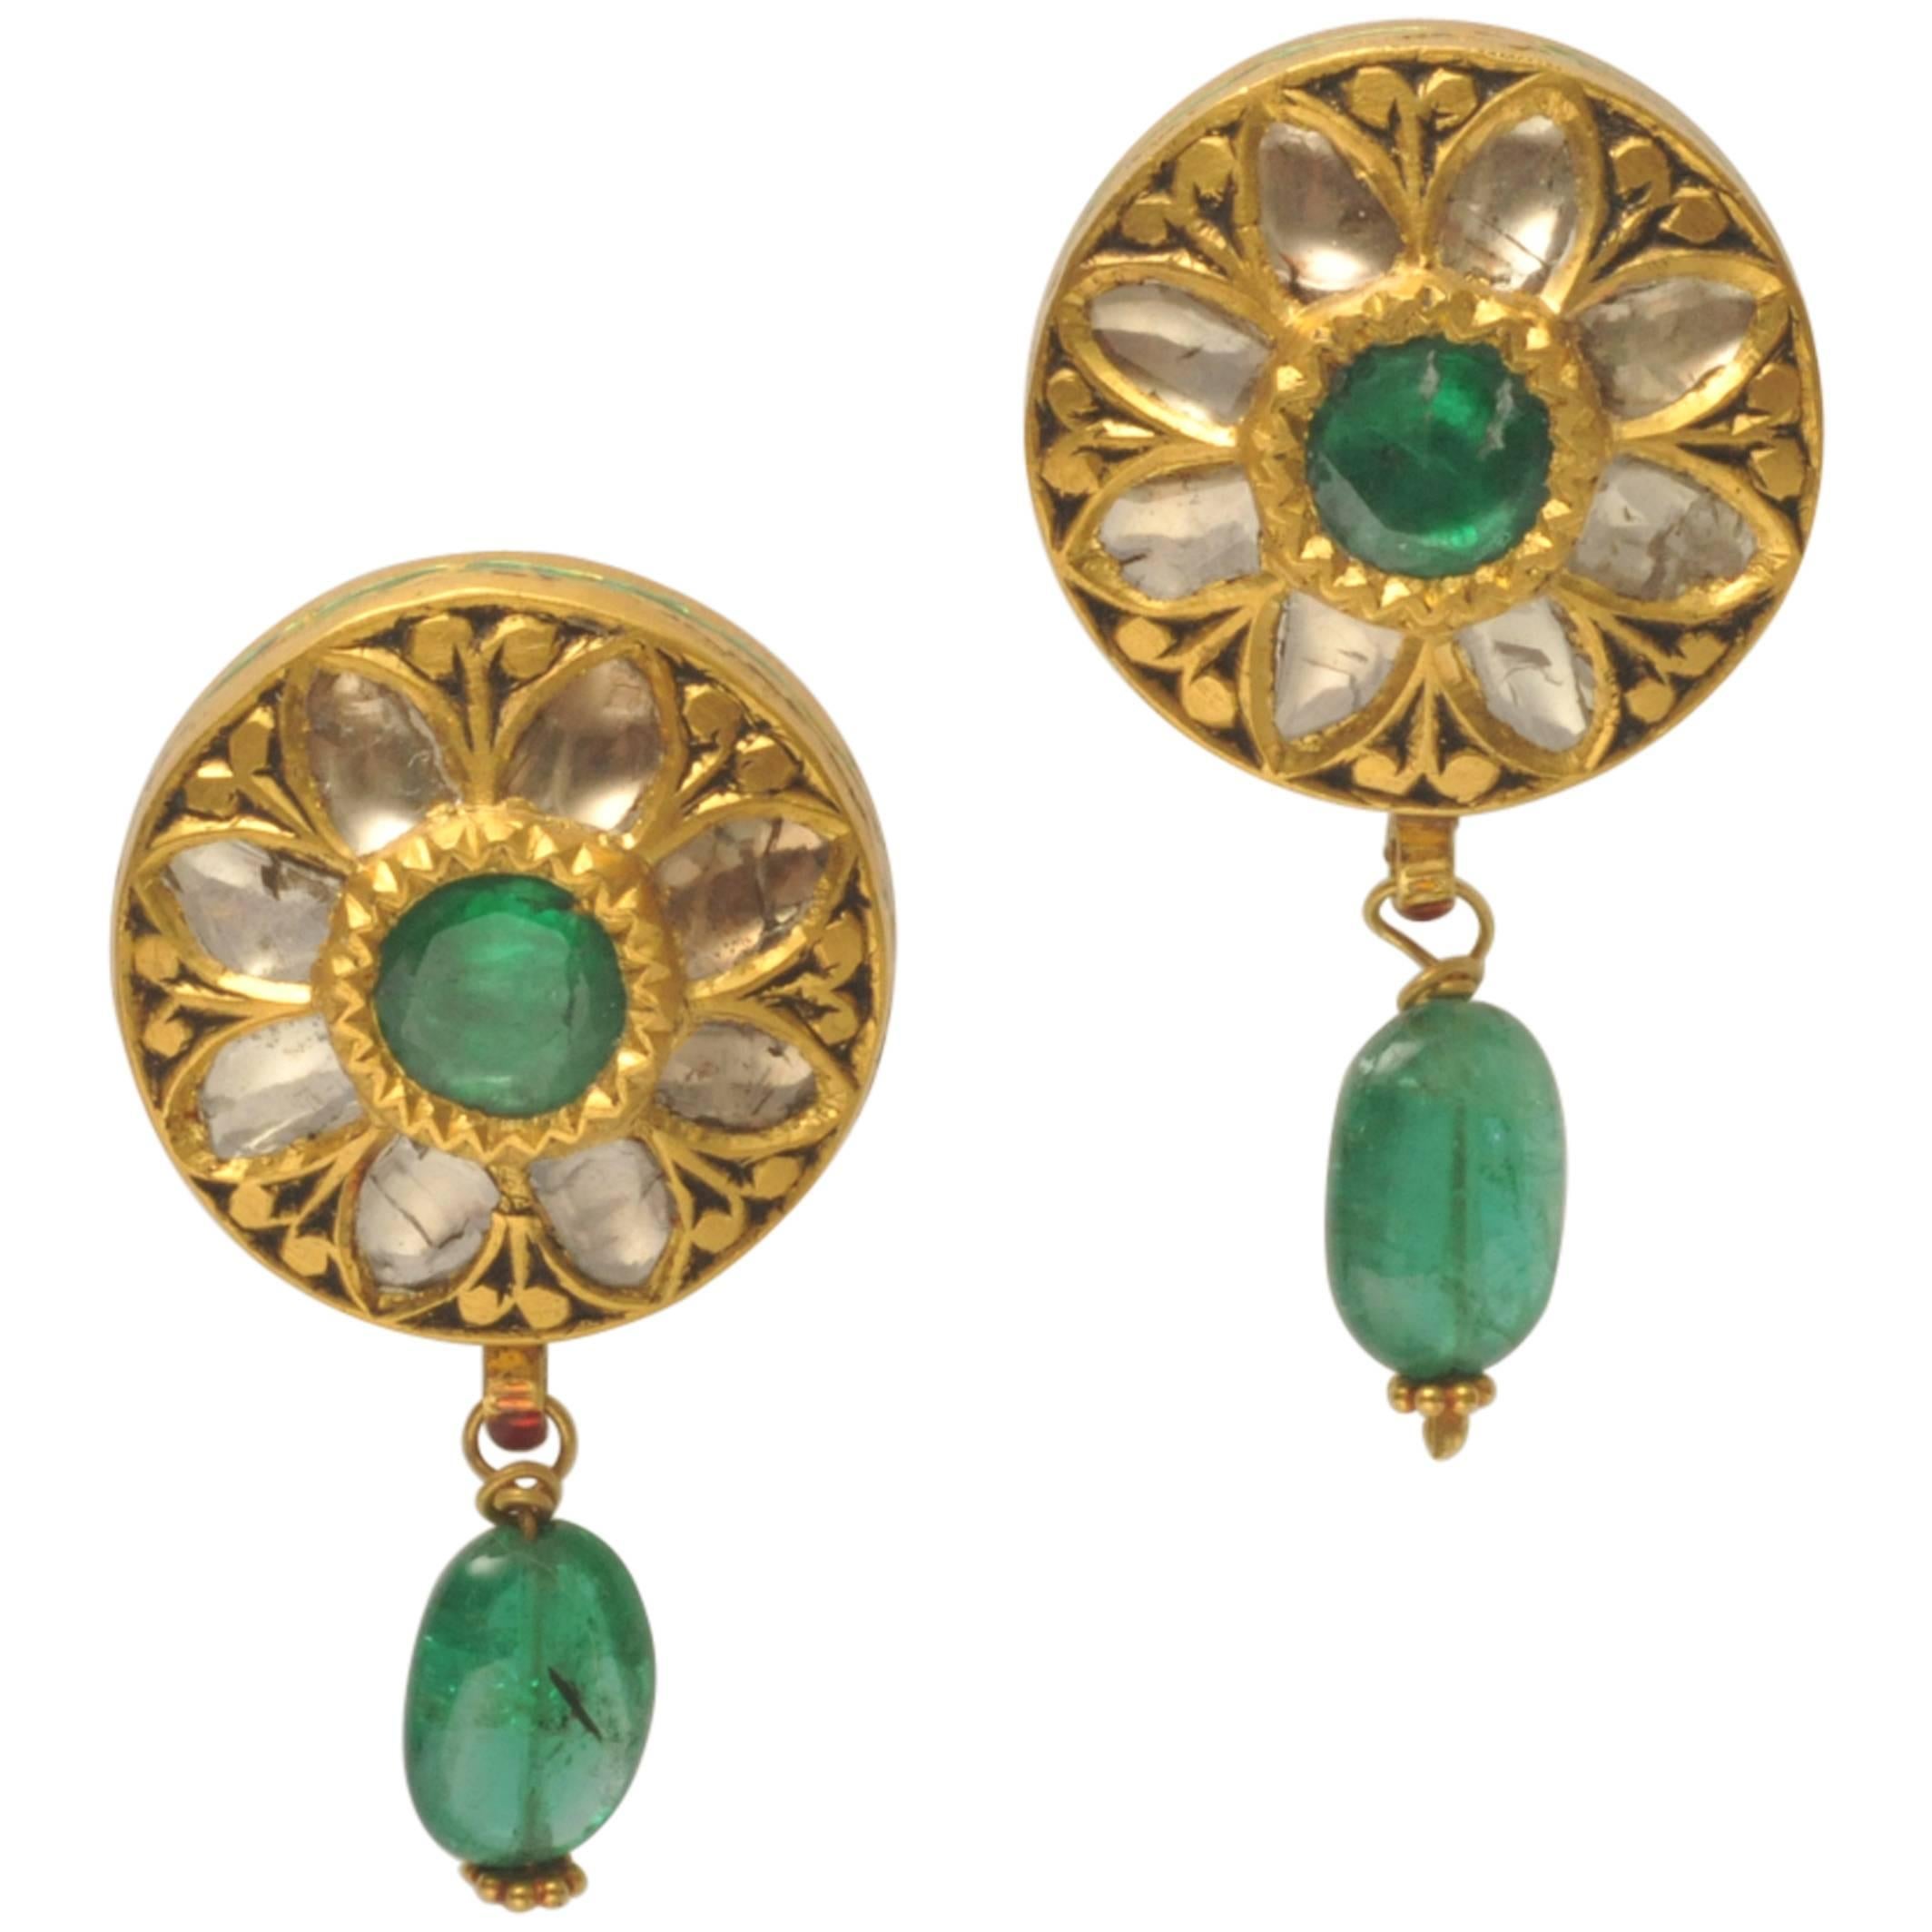 Rare Rosecut Diamonds, Faceted Emerald and 22 Gold Earrings from India, C.1940's